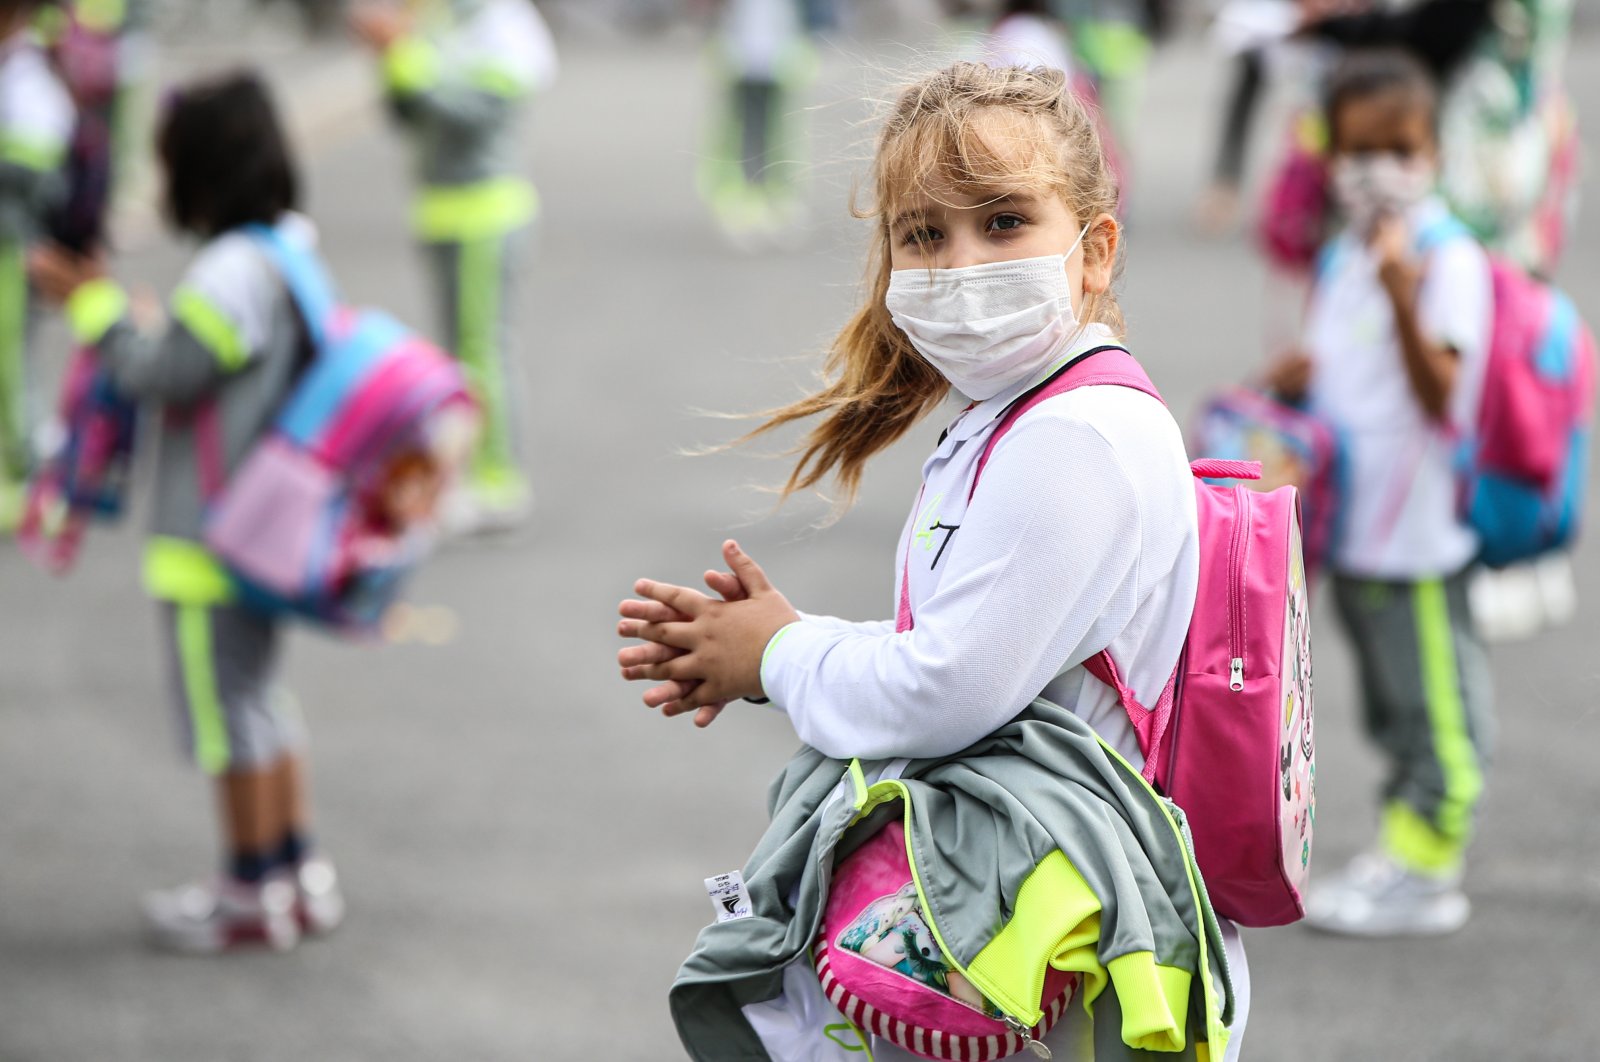 Children are required to wear masks at all times and keep their distance even when out on playgrounds at Haldun Taner Primary School, Beylikdüzü, Istanbul, Sept. 21, 2020. (AA Photo)